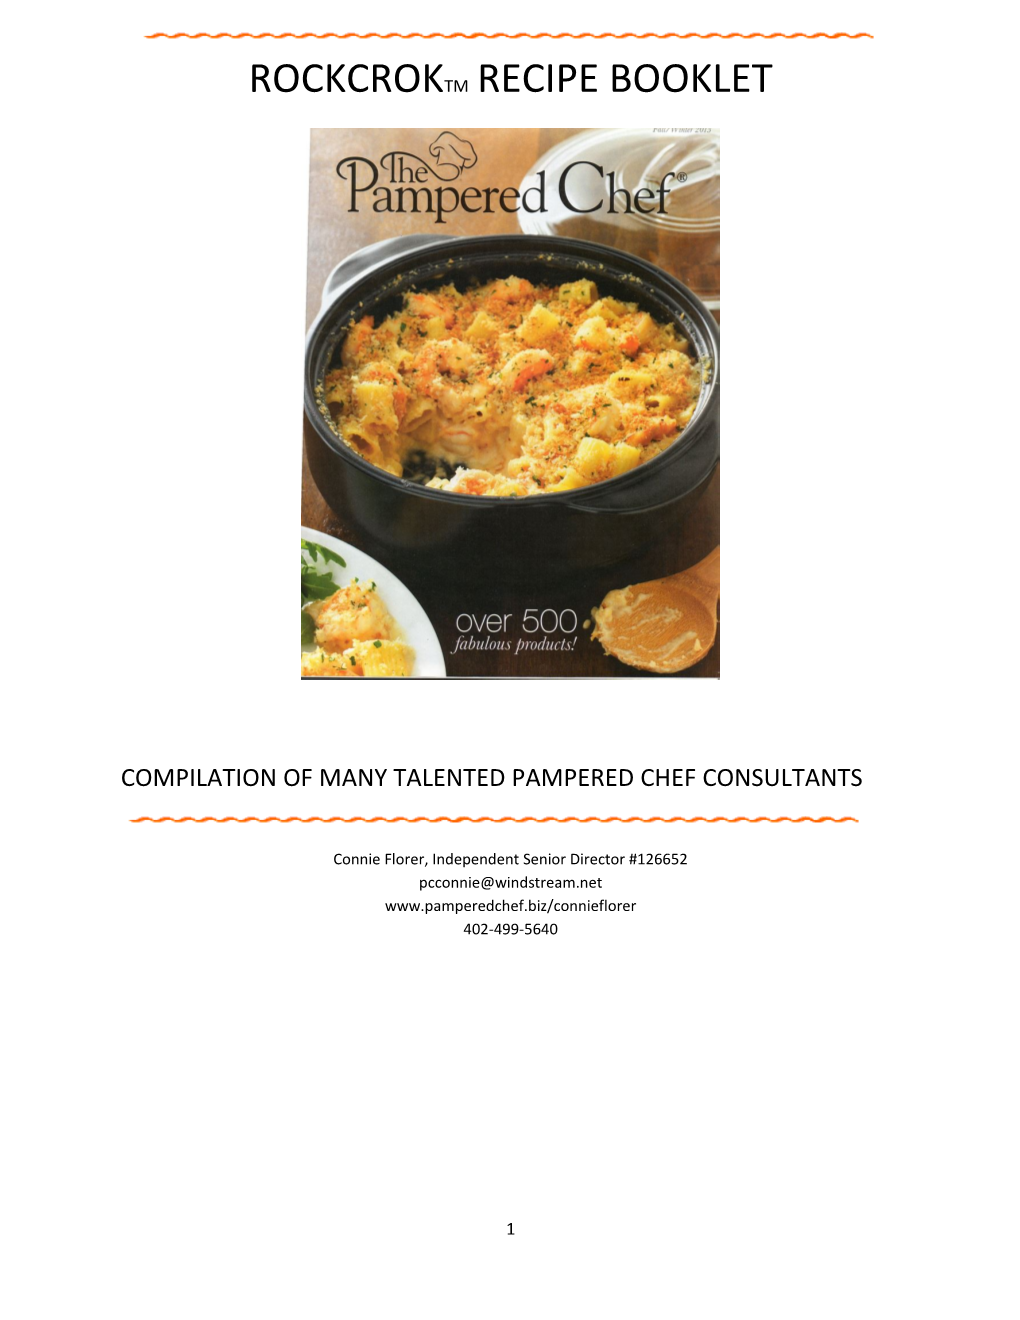 Compilation of Many Talented Pampered Chef Consultants